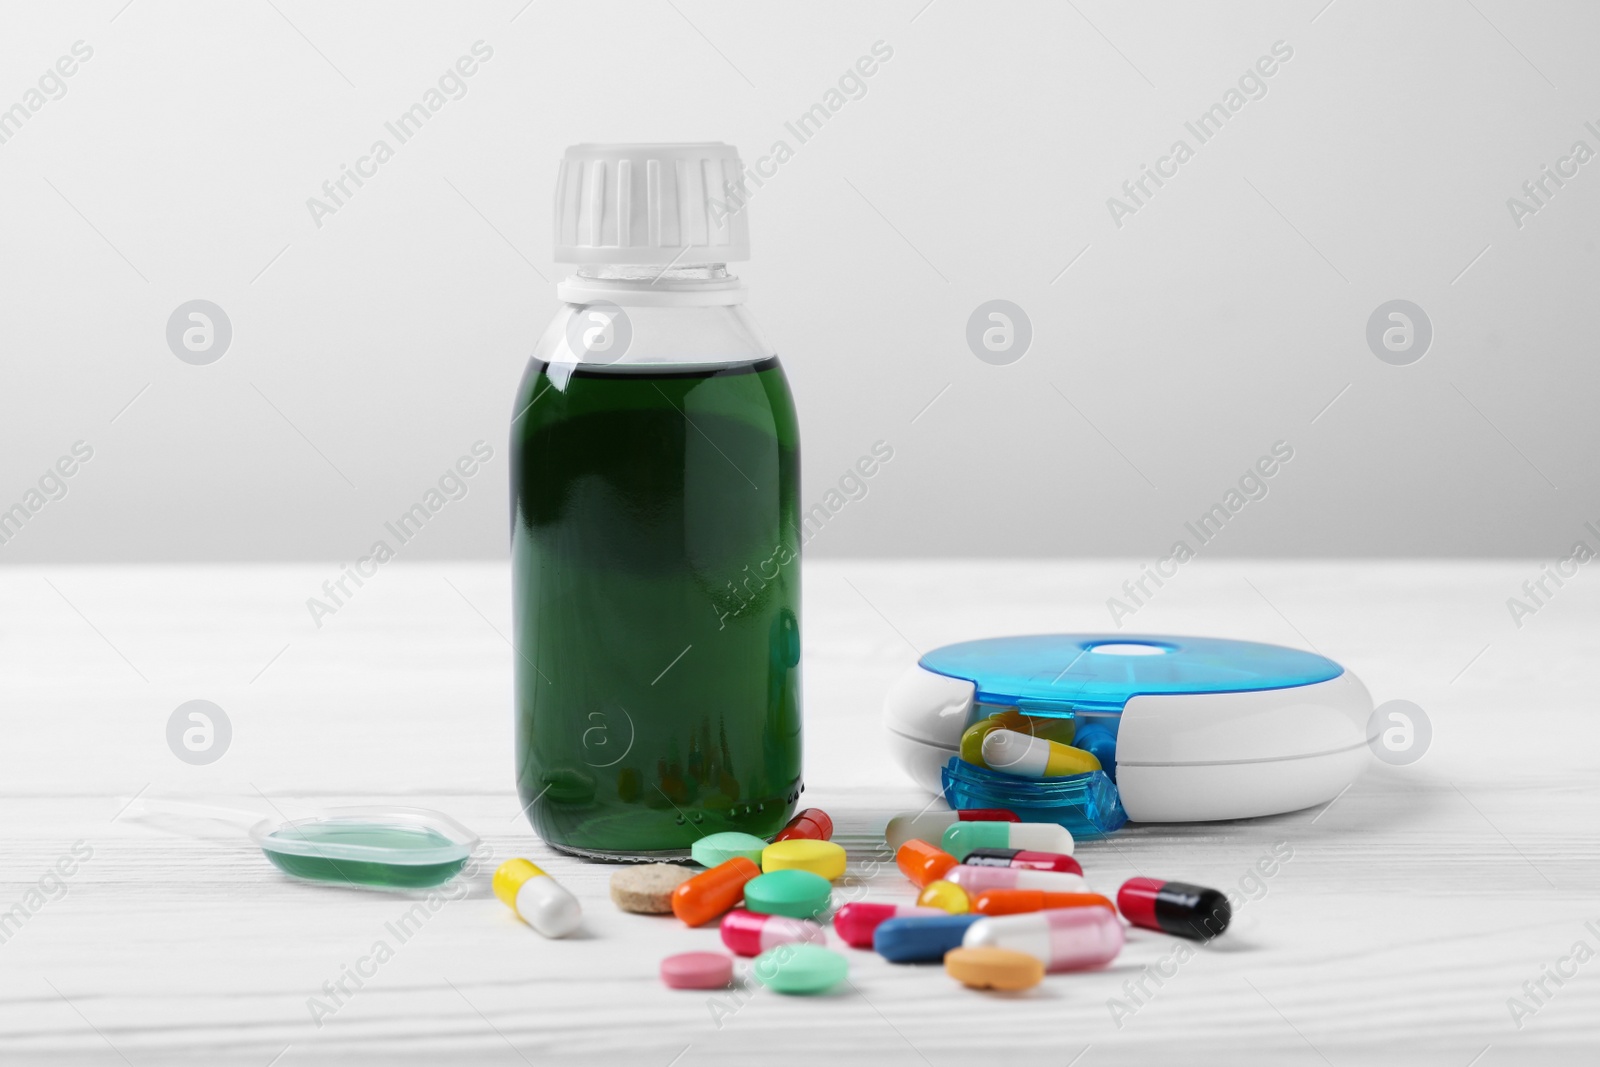 Photo of Bottle of syrup, dosing spoon, weekly pill organizer and pills on white table against light grey background. Cold medicine